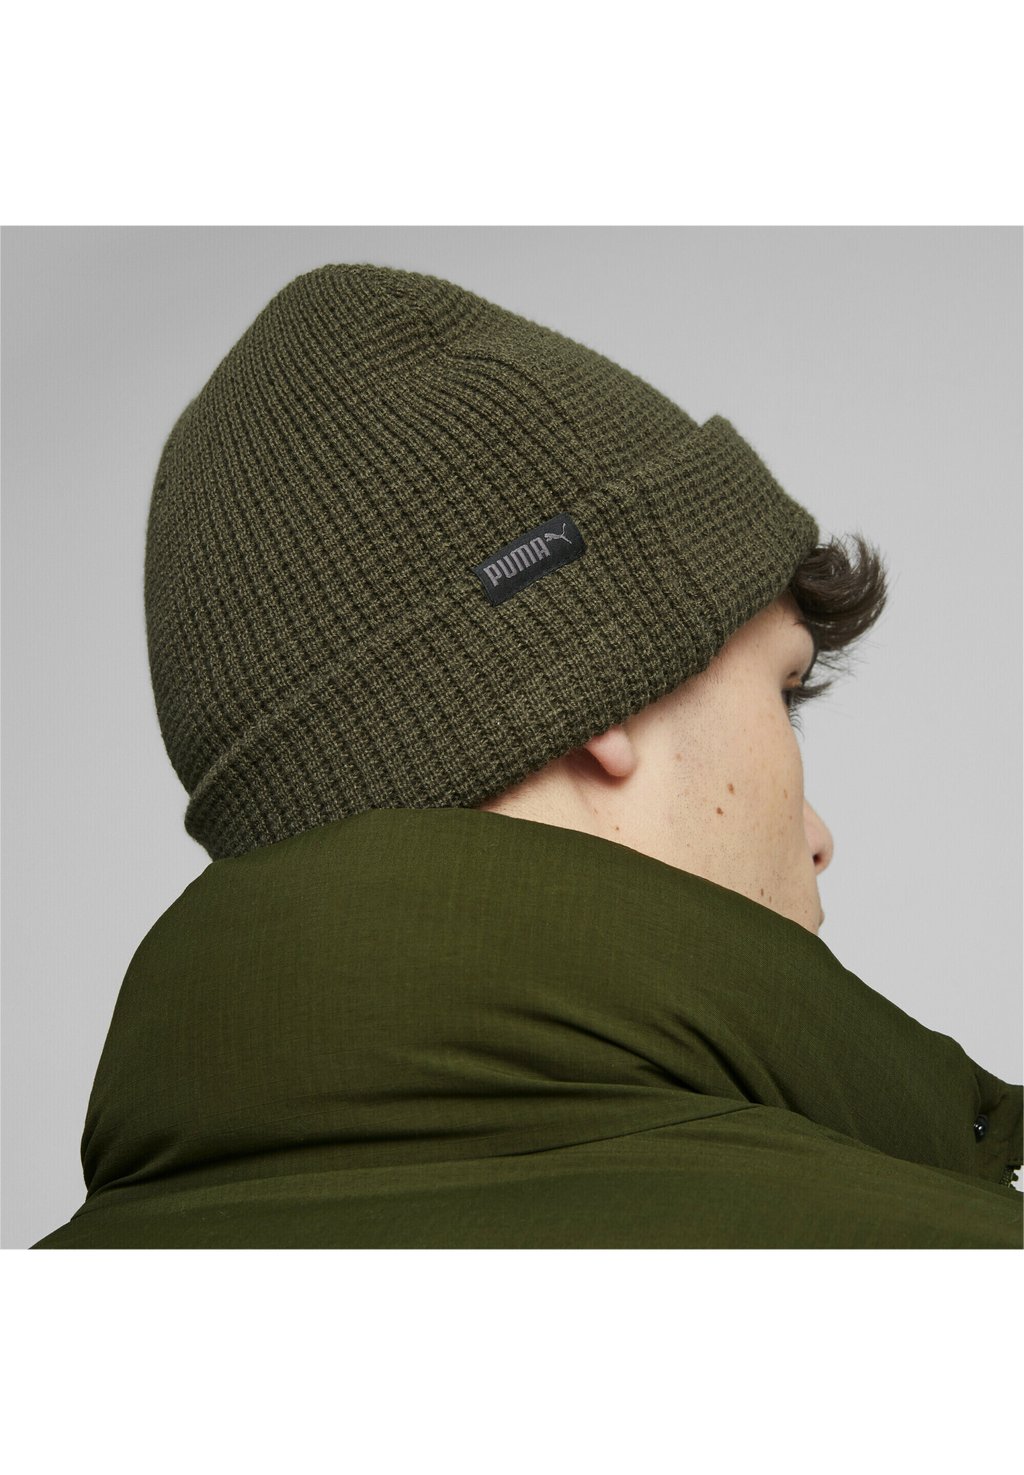 Шапка-бини Archive Mid Fit Puma, цвет myrtle archive mid fit beanie